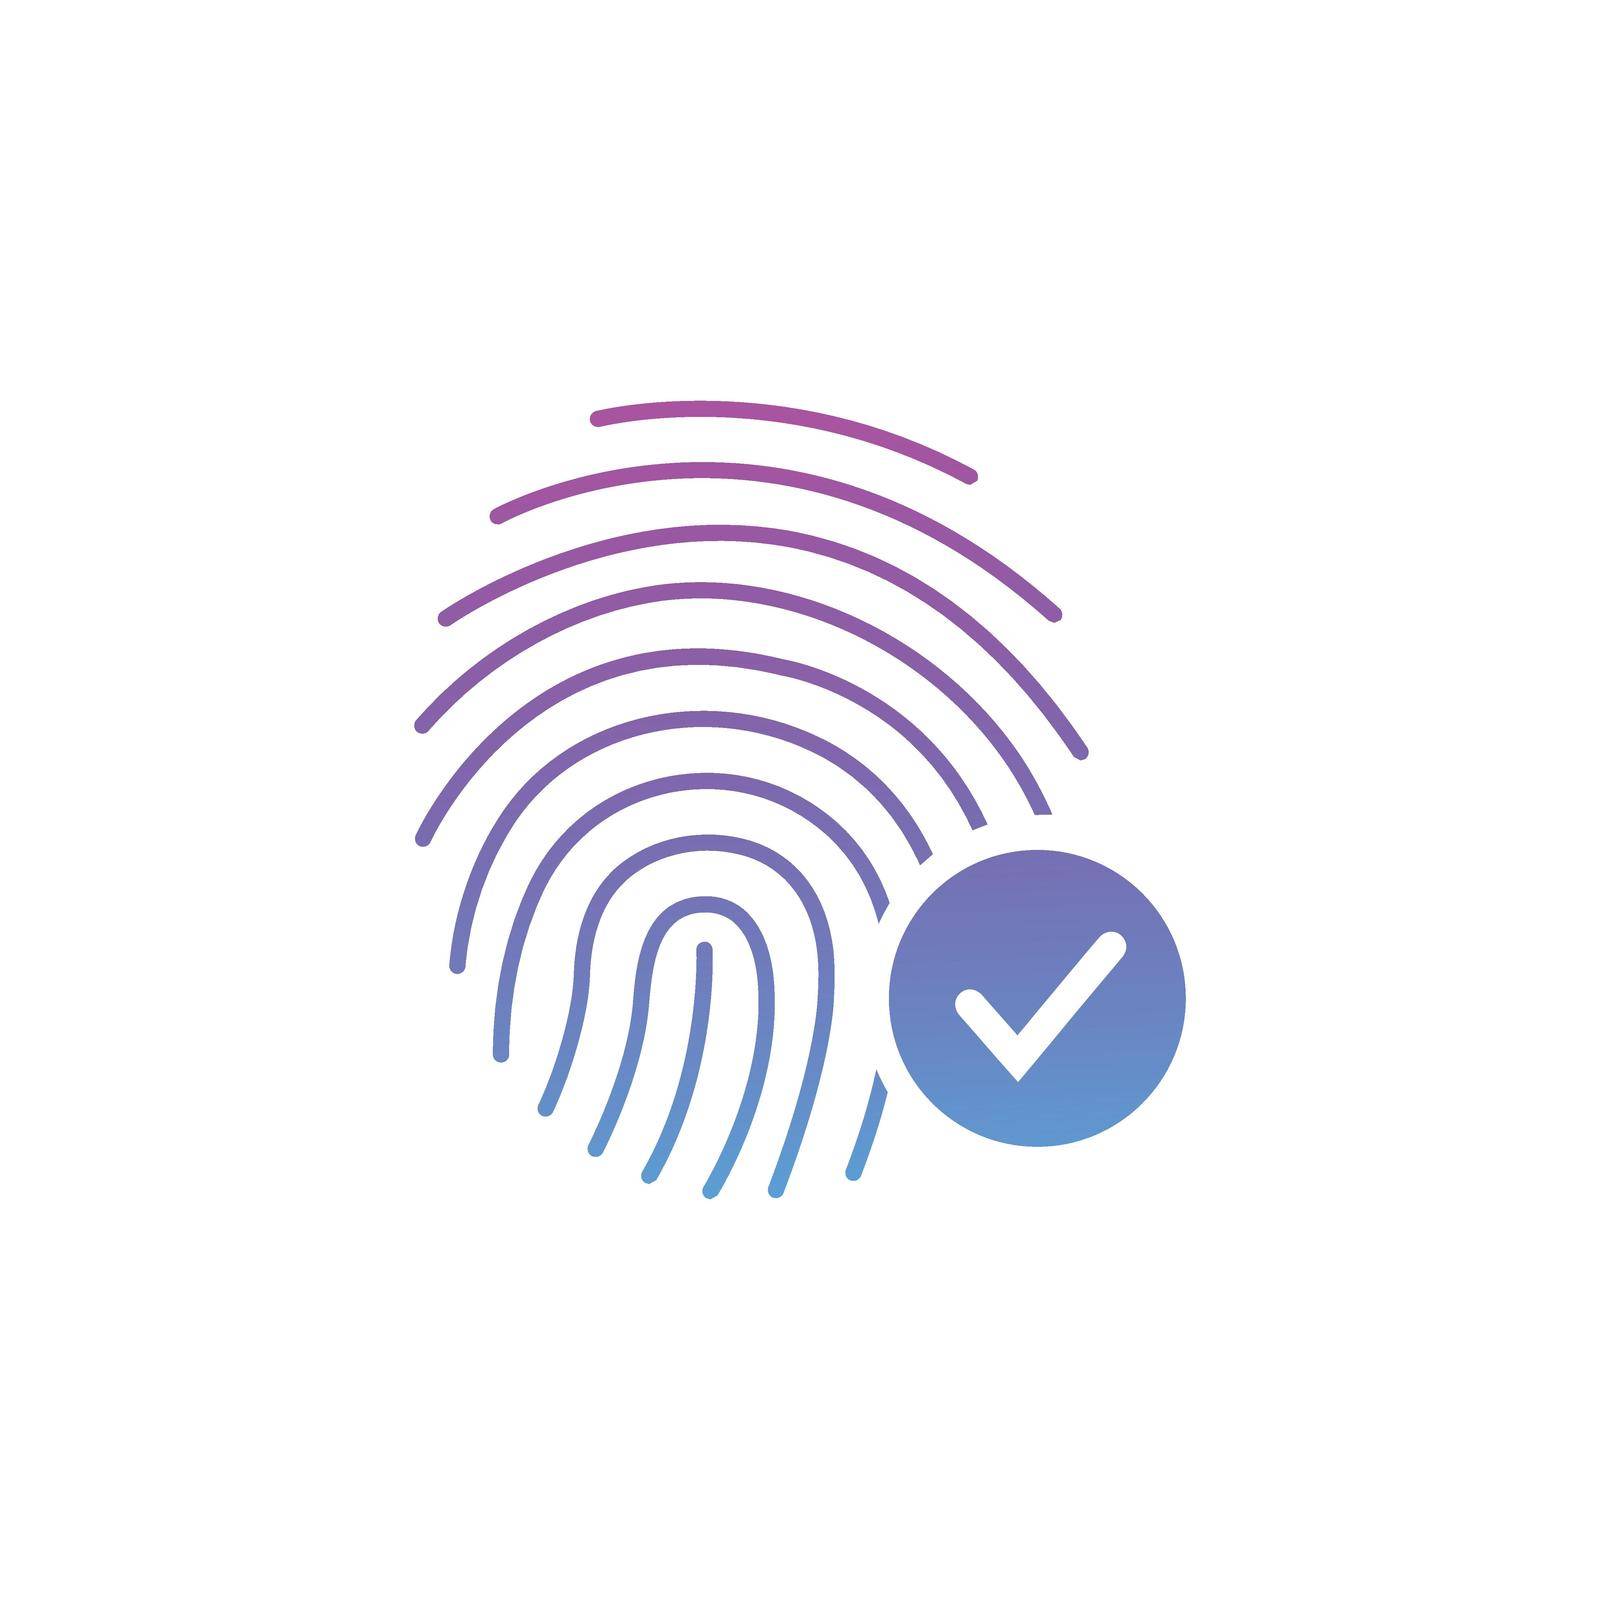 Fingerprint Success Icon, thumbprint with checkmark. vector illustration isolated on white background. by Kyrylov